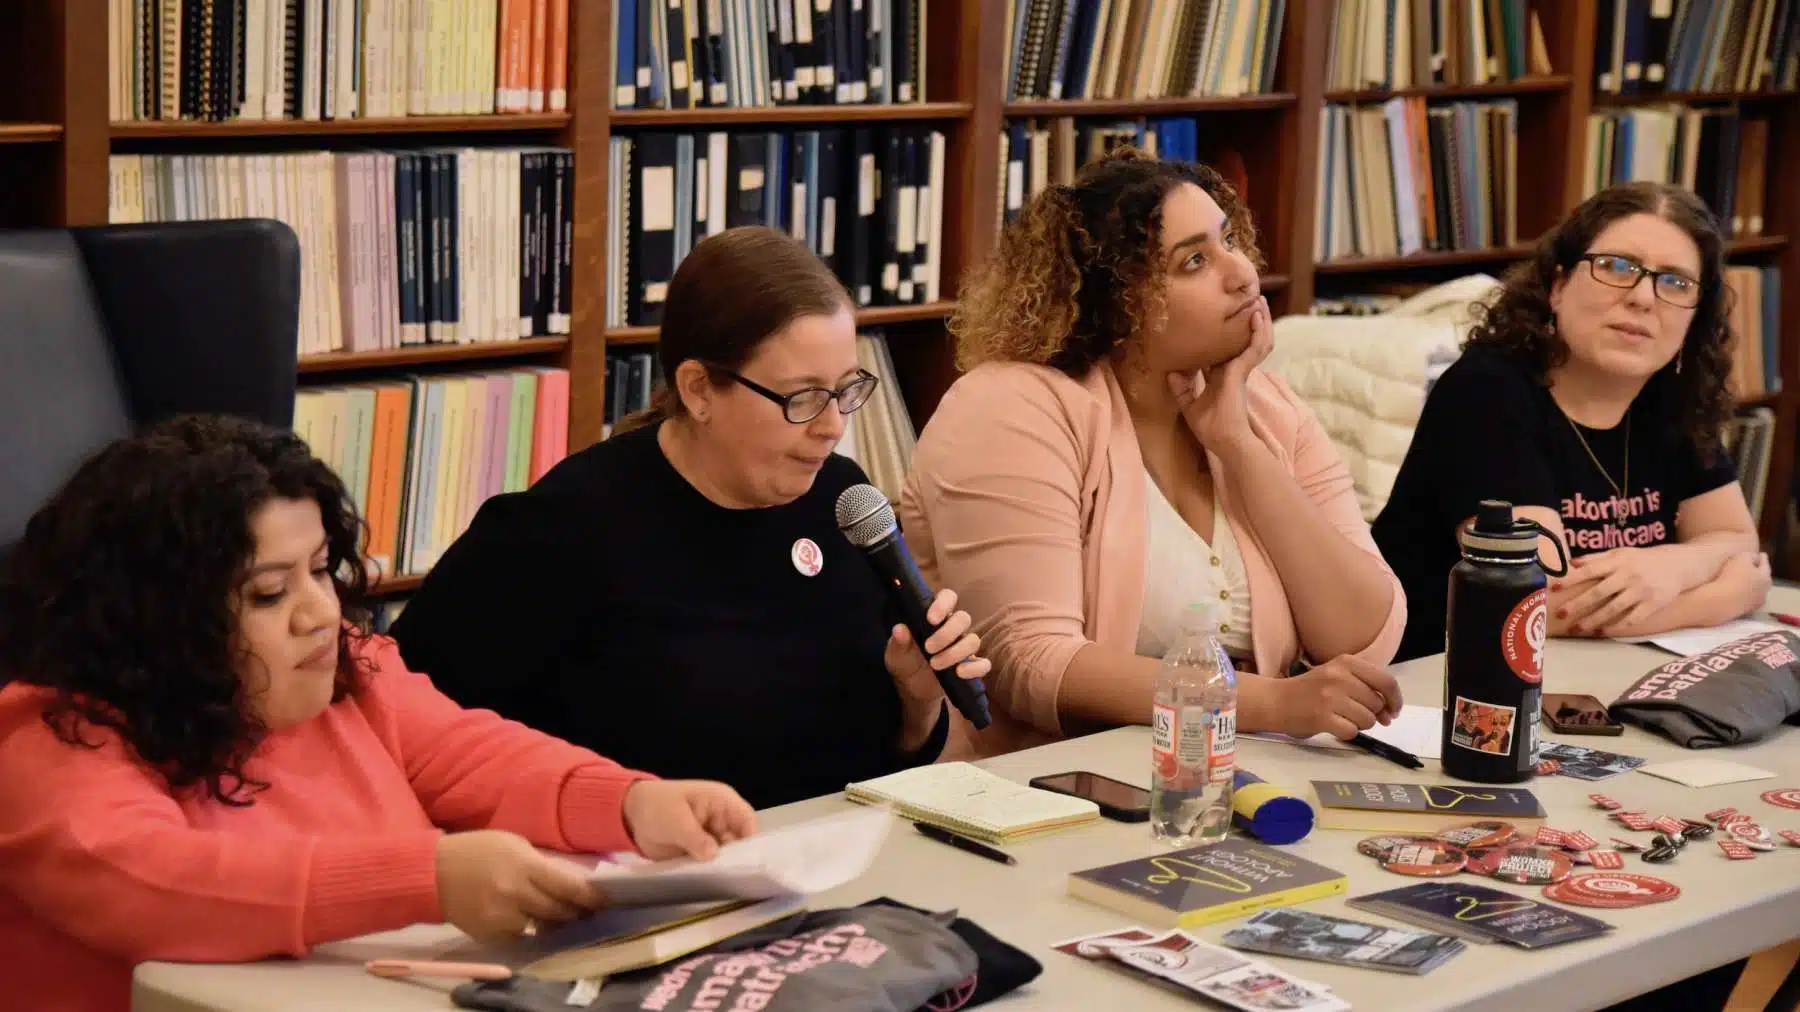 Rhode Island News: The Womxn Project holds panel on state funded healthcare prohibitions against paying for abortion services